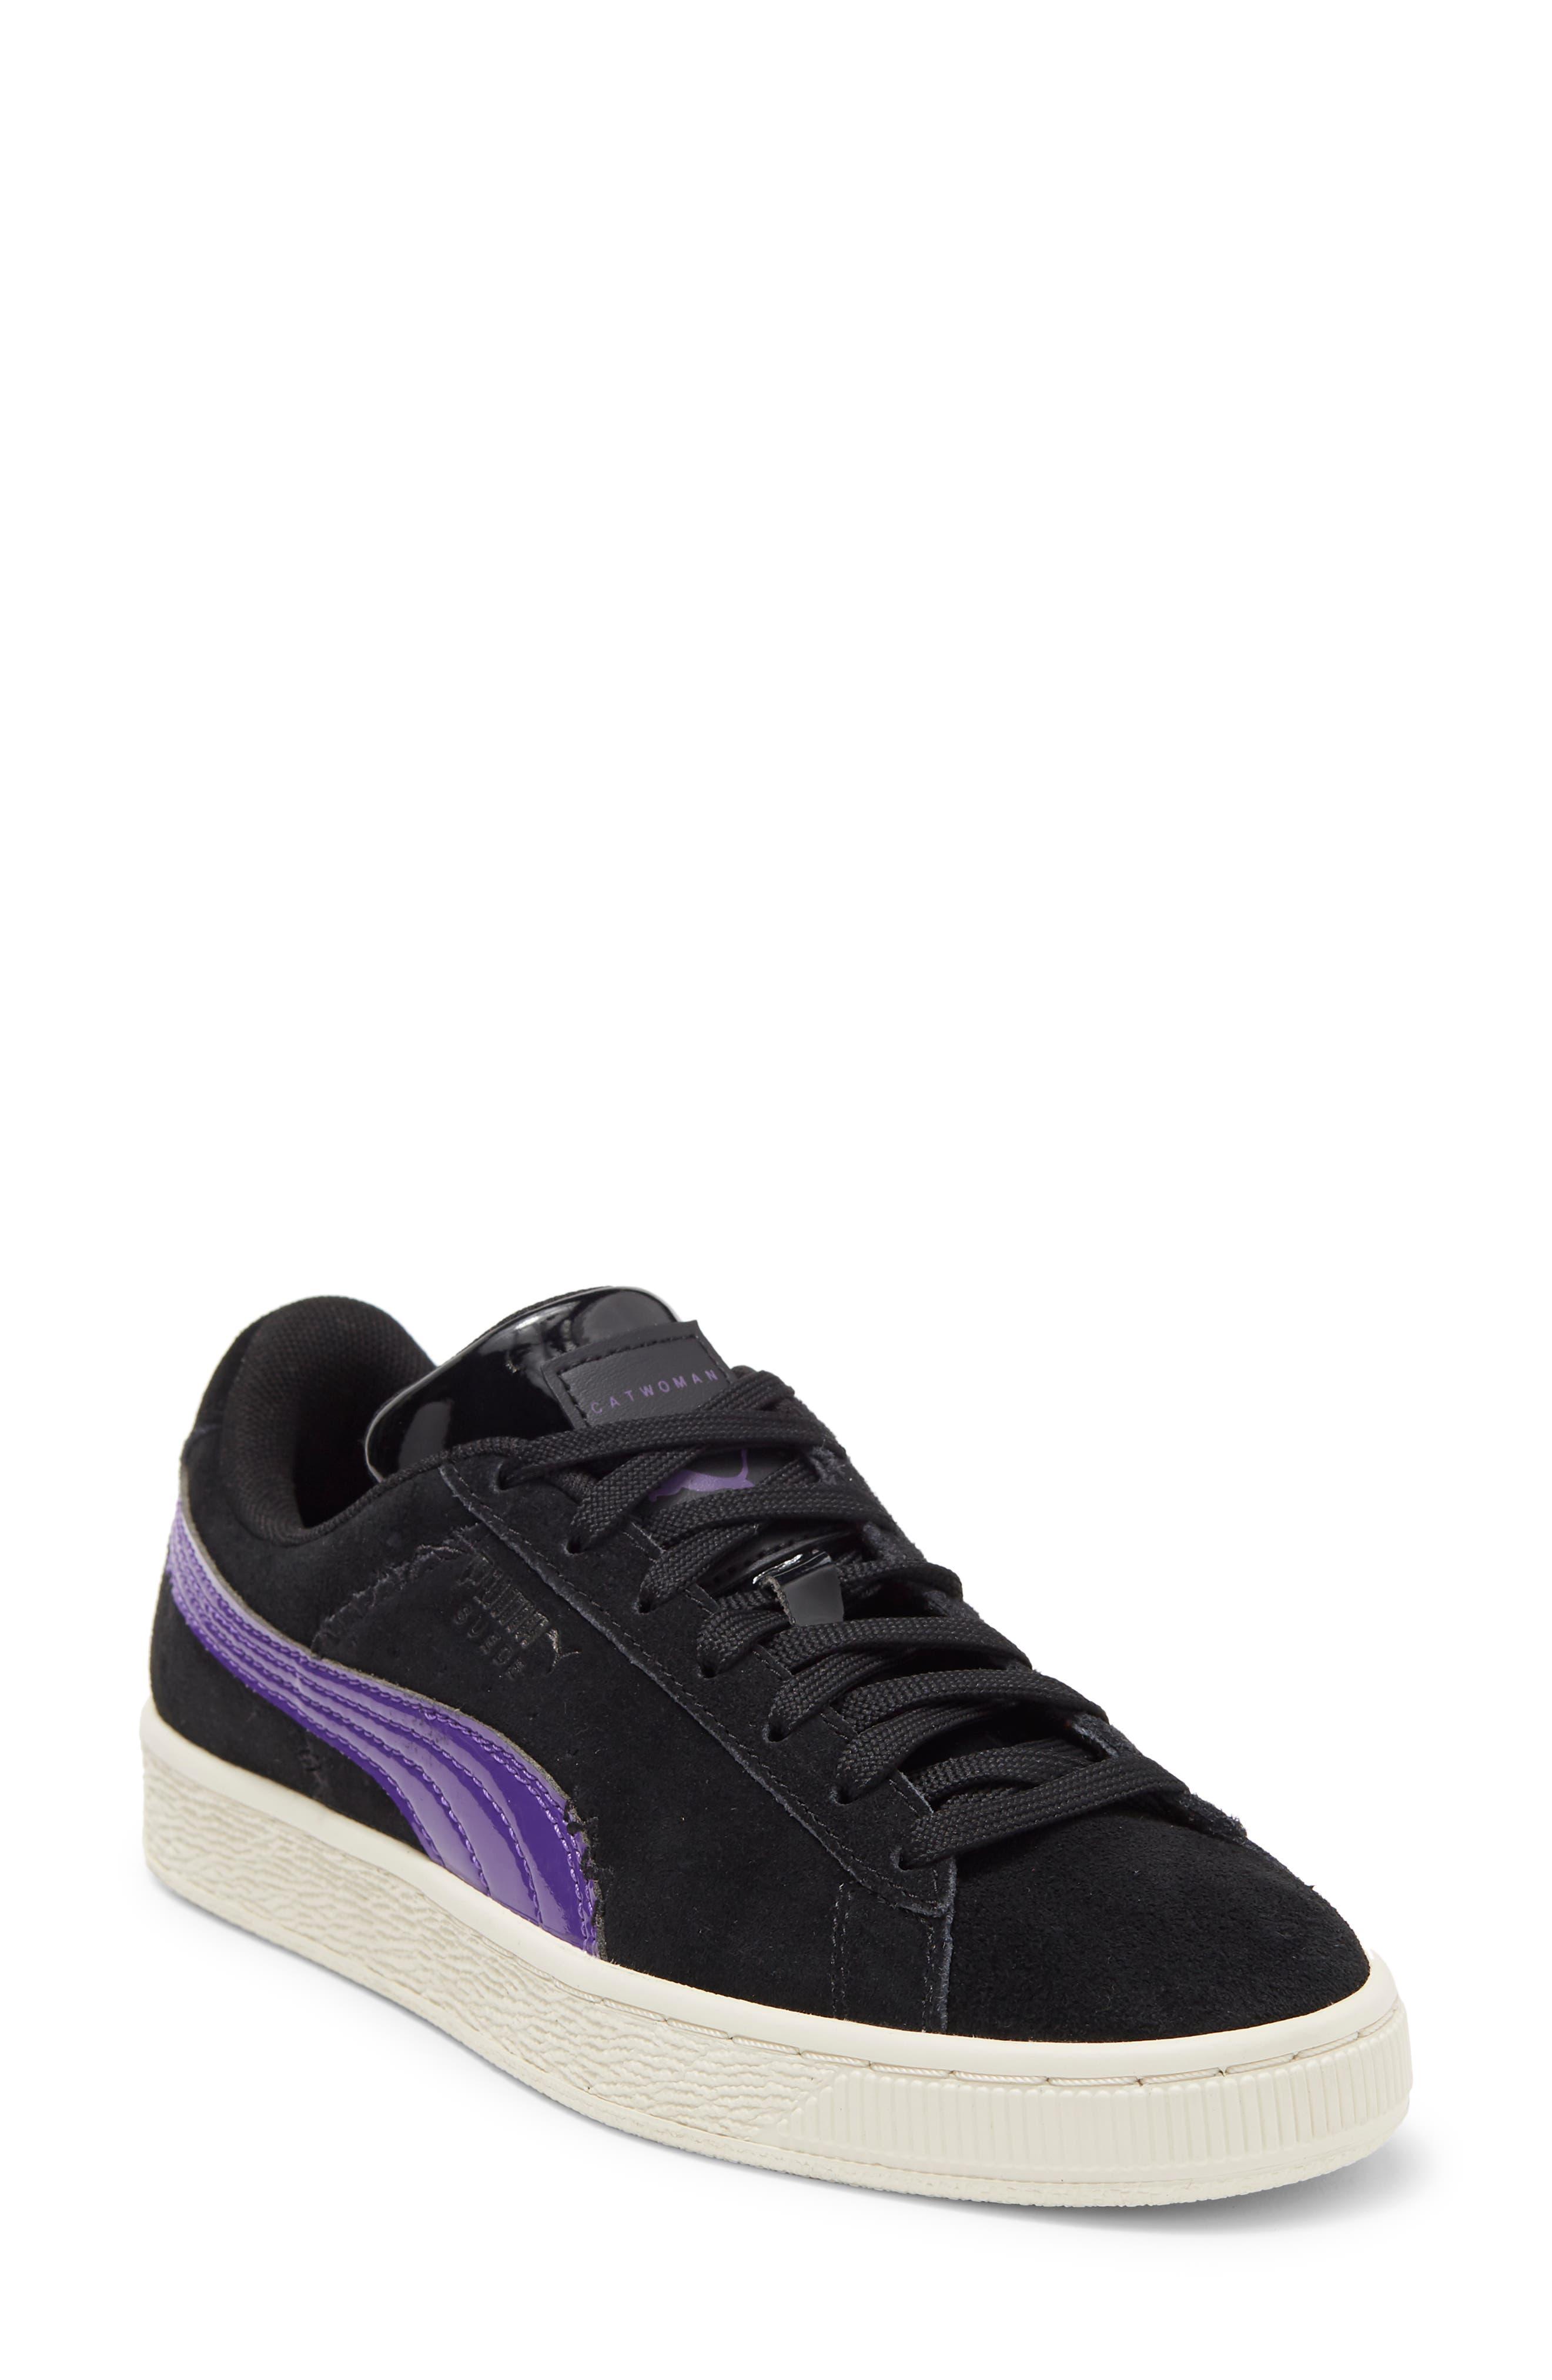 PUMA Classic Catwoman Sneaker In Black-heliotrope At Nordstrom Rack | Lyst